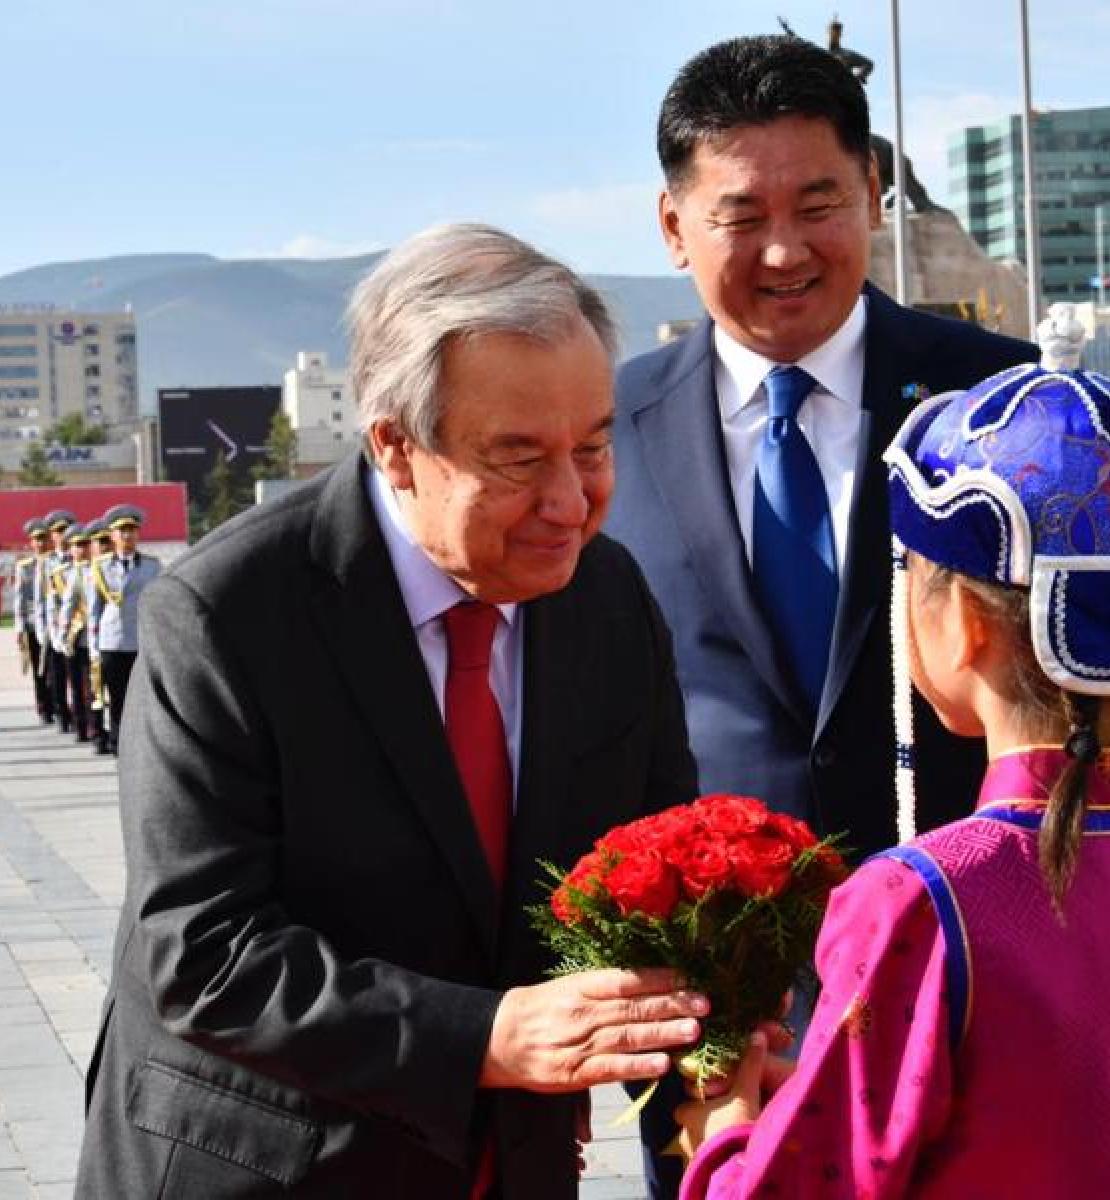 The UN Chief, in Mongolia, receives flowers from a Mongolian girl.